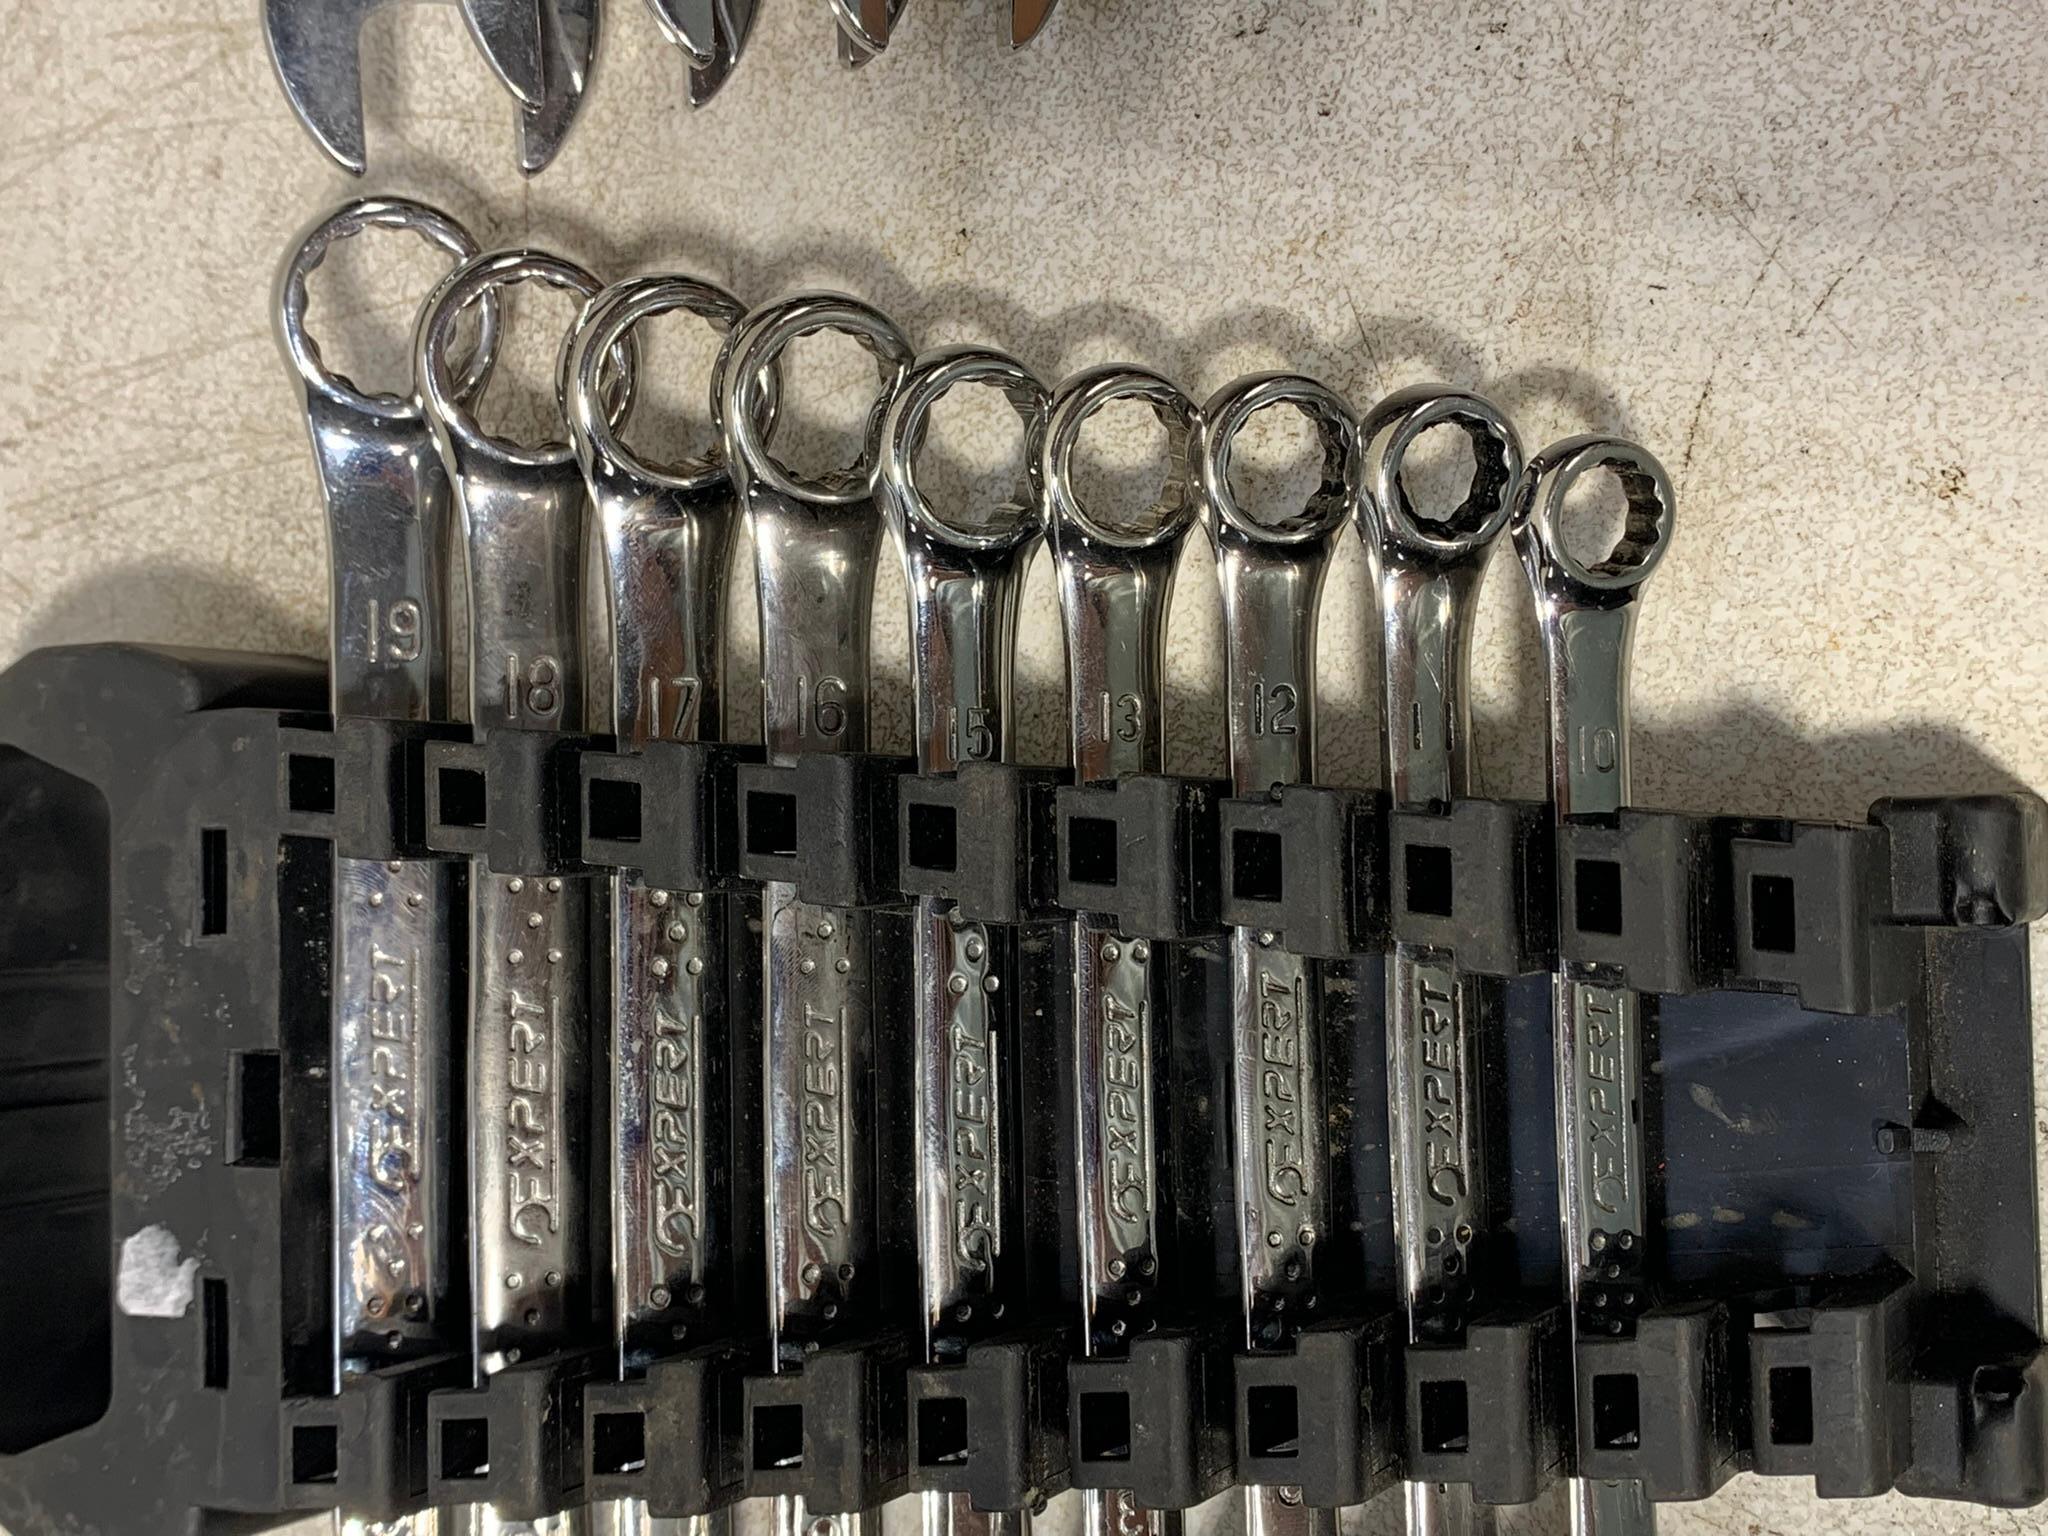 Expert 9pc SAE Wrench Set & Expert 9pc Metric Wrench Set